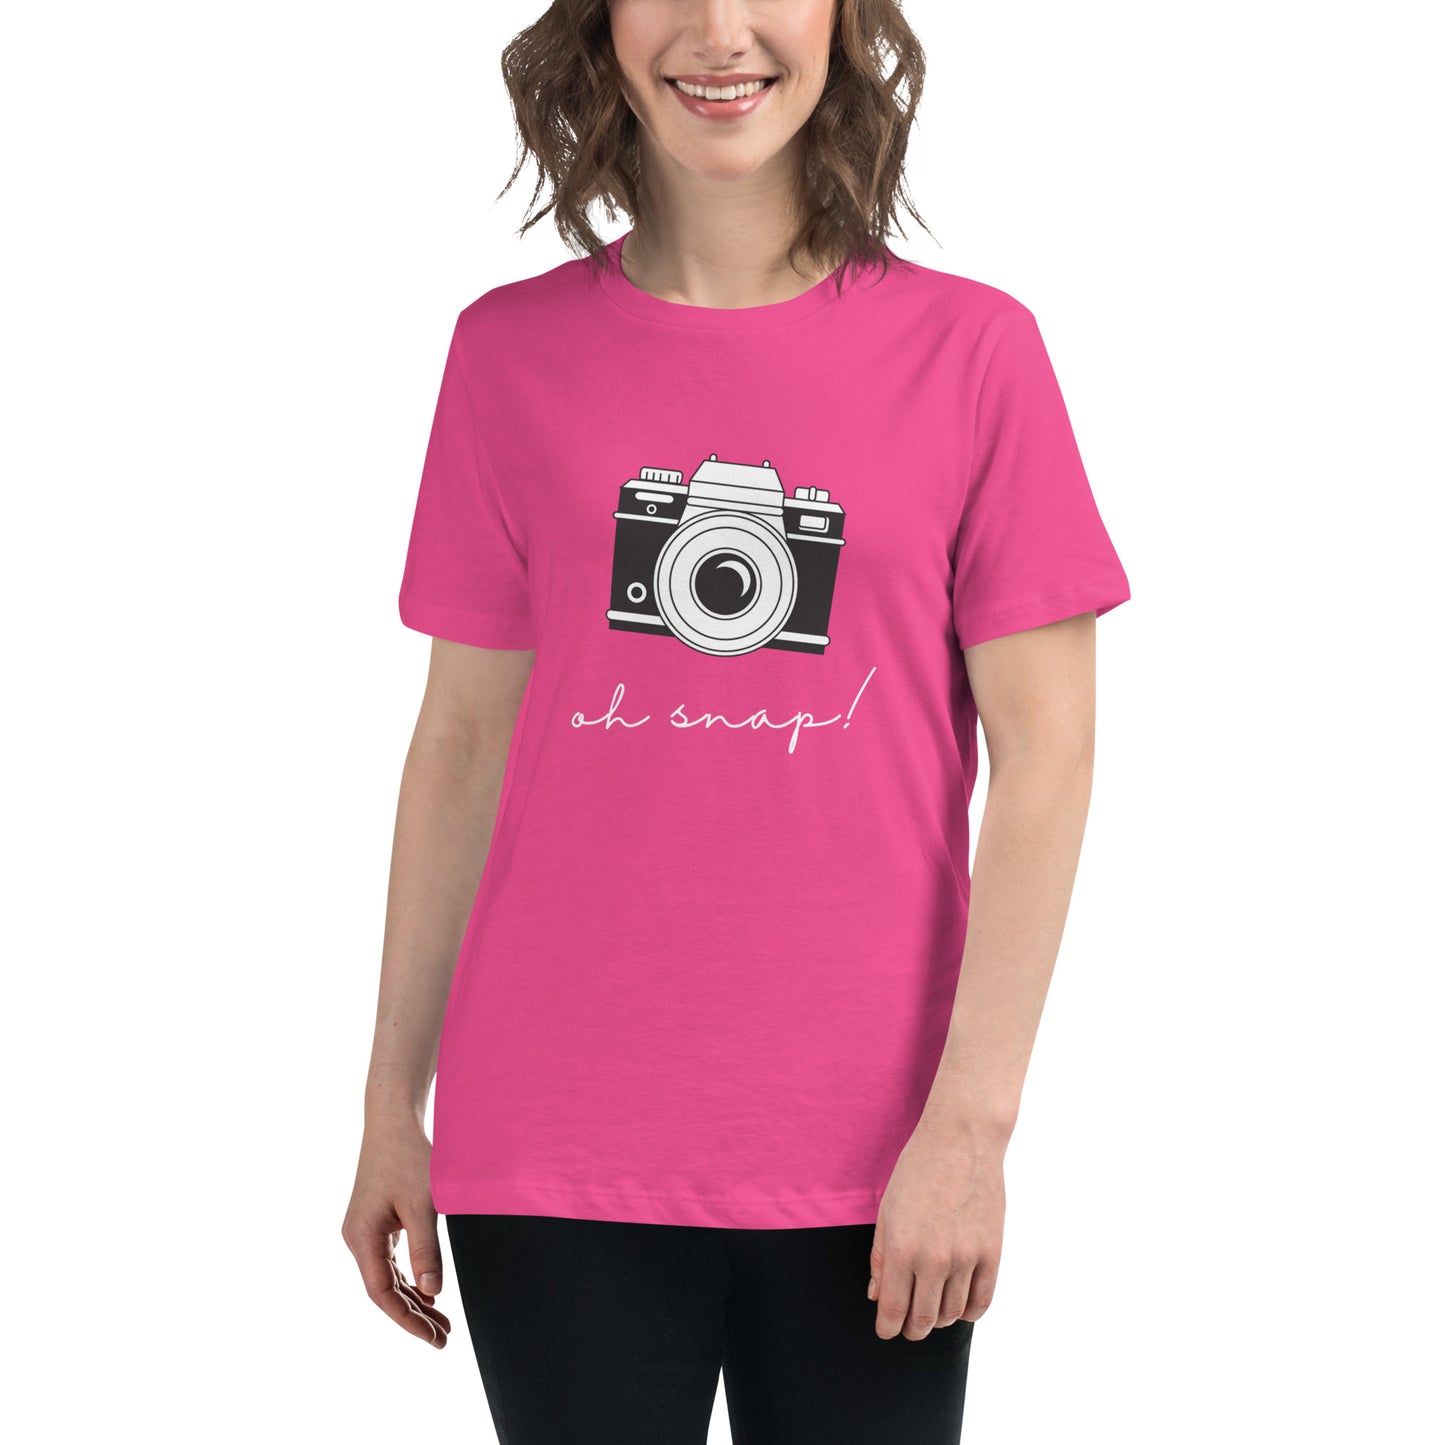 Oh Snap (white print) Women's Relaxed T-Shirt